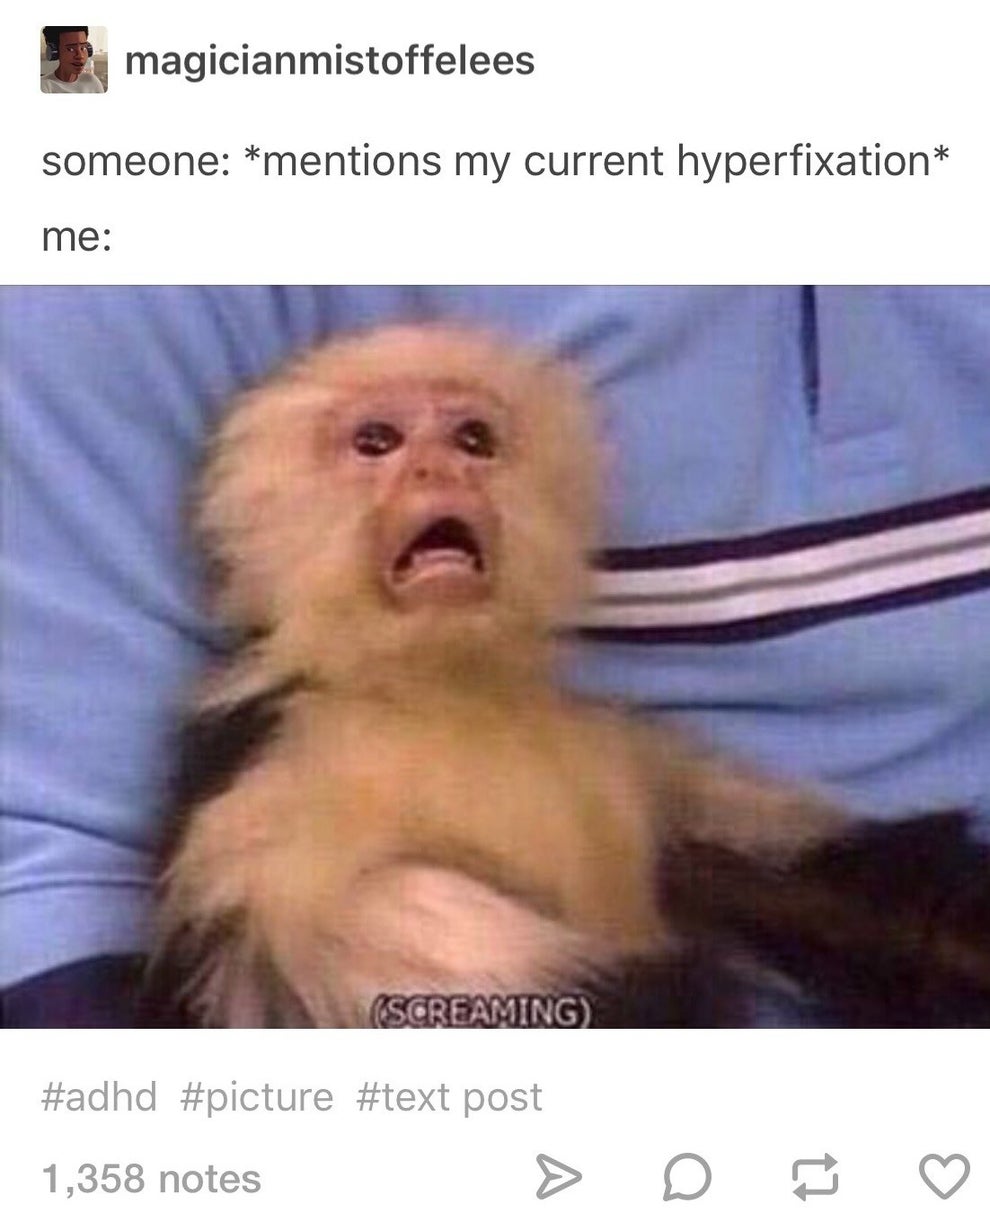 23 ADHD Tumblr Posts That Are A Little Too Relatable